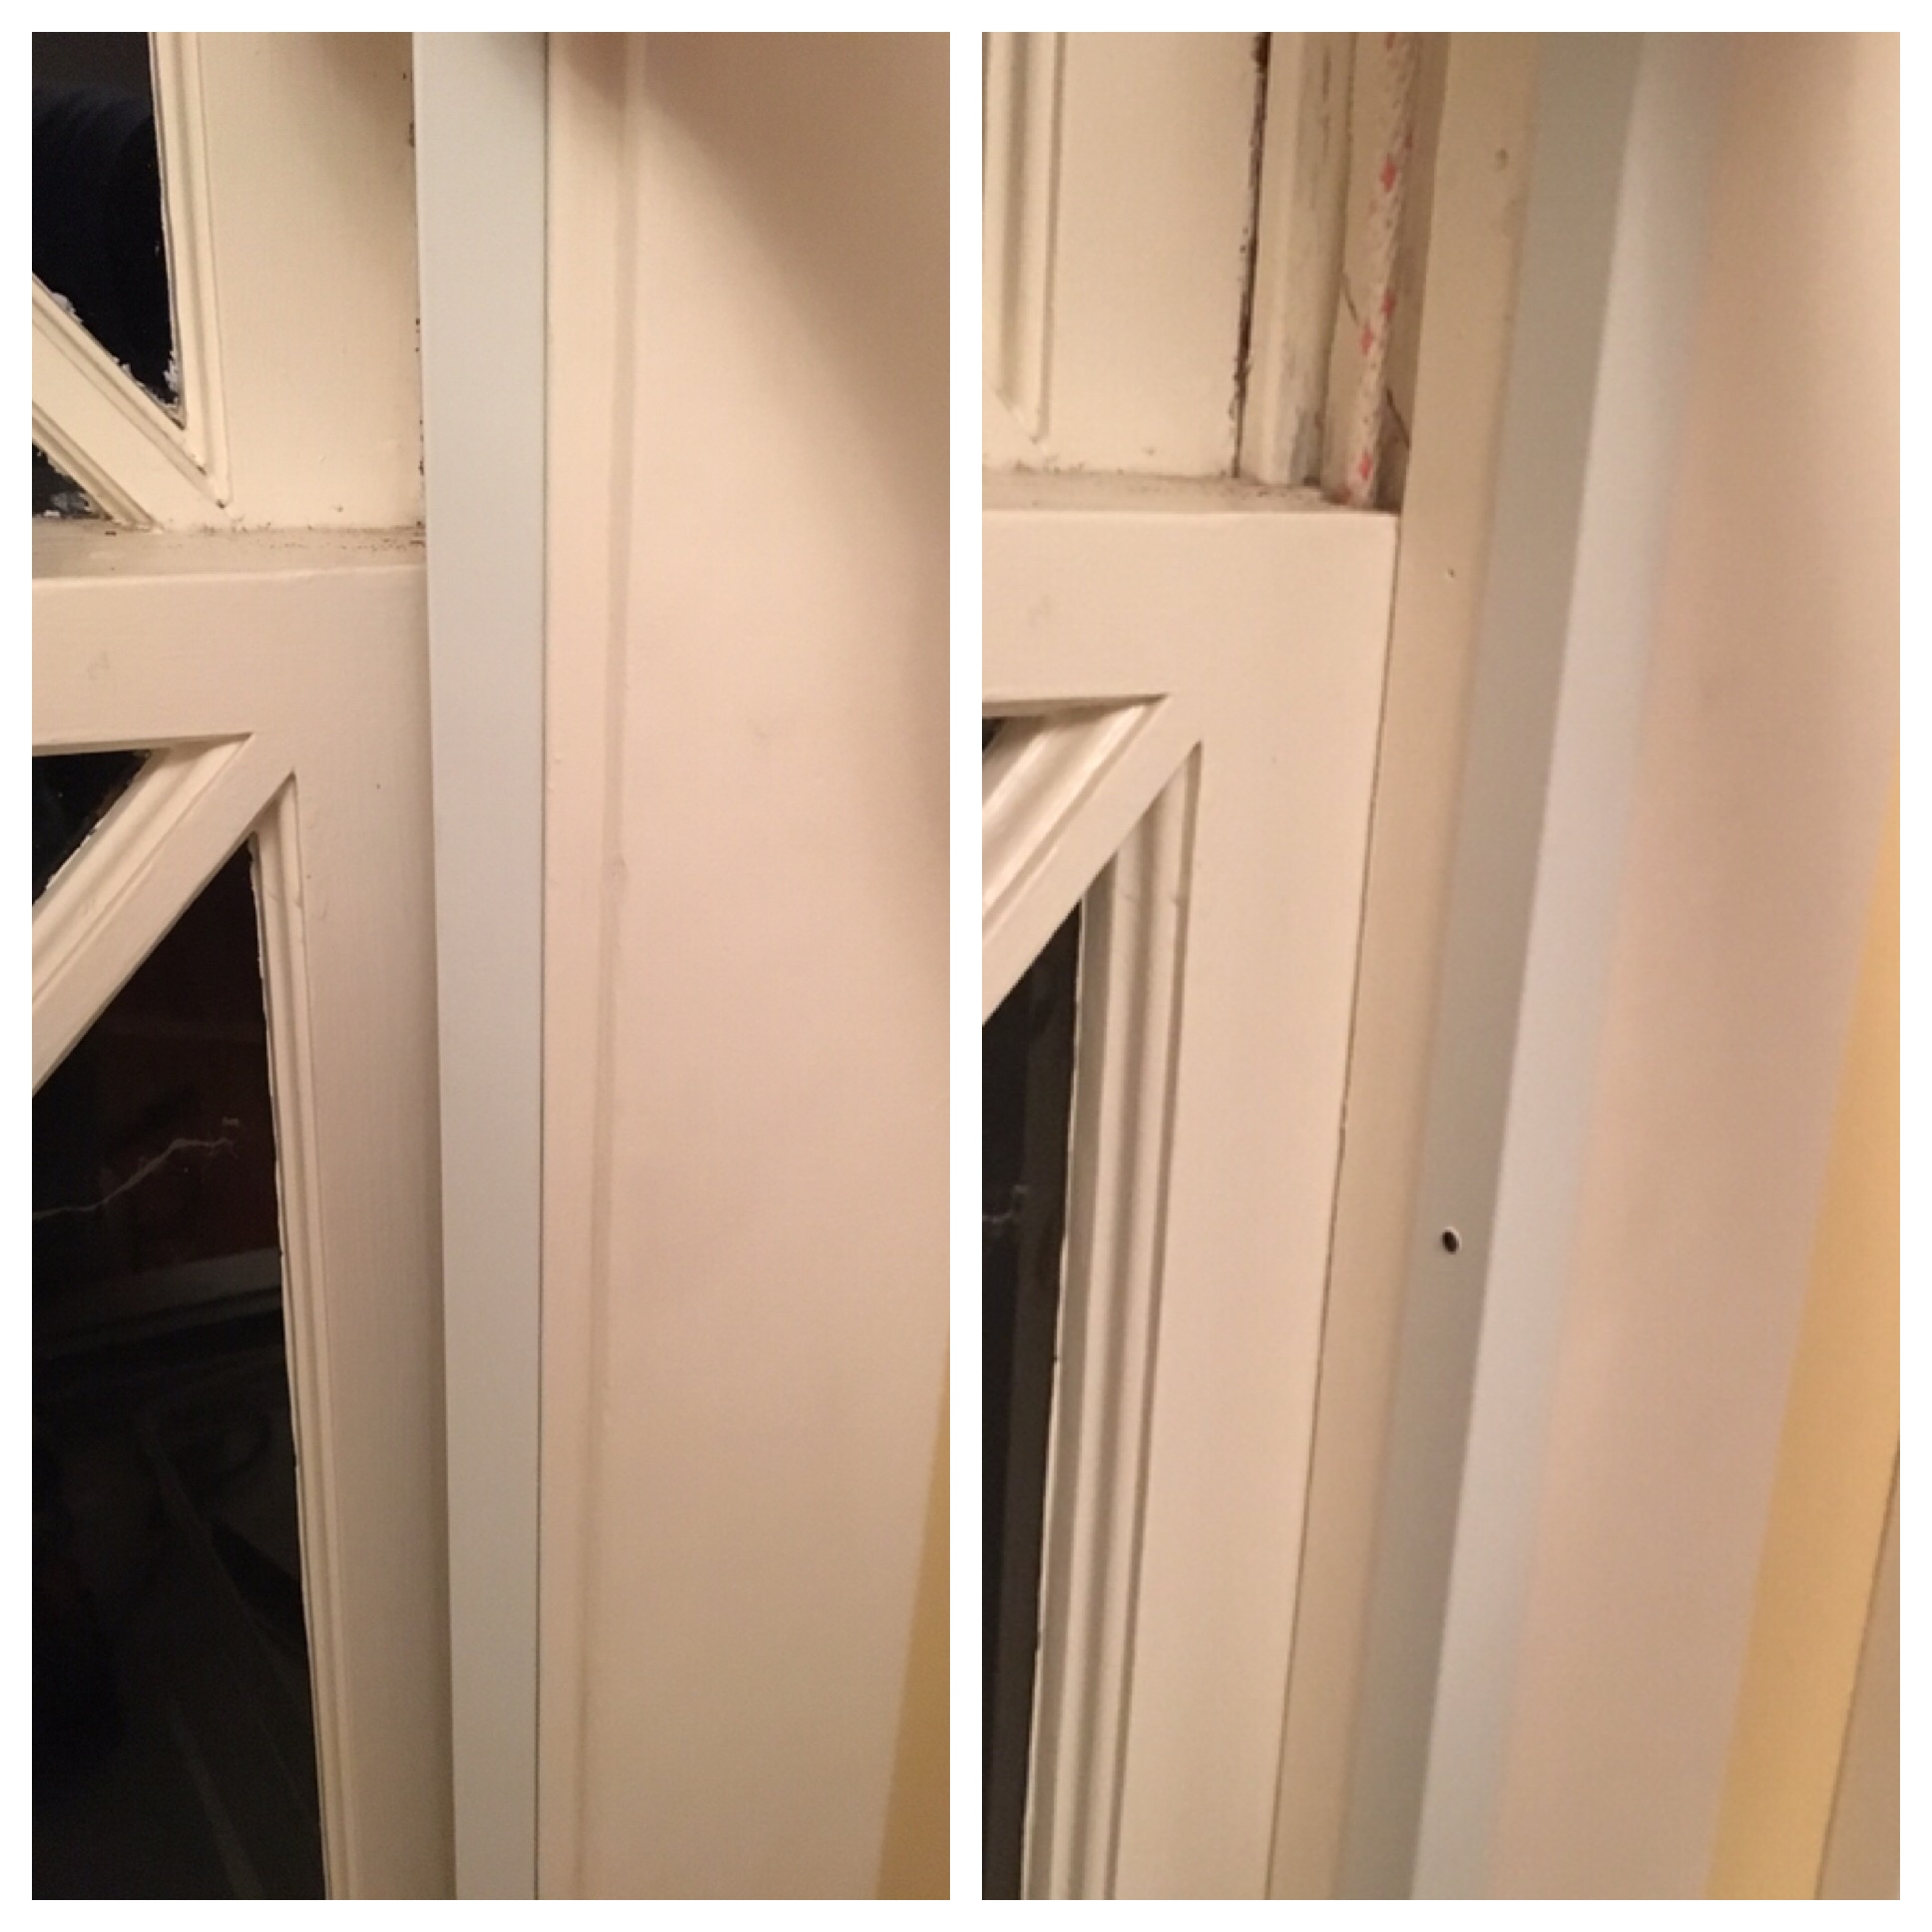 DIY Indow Windows (Interior Storm Windows) with the Magnetseal Kit